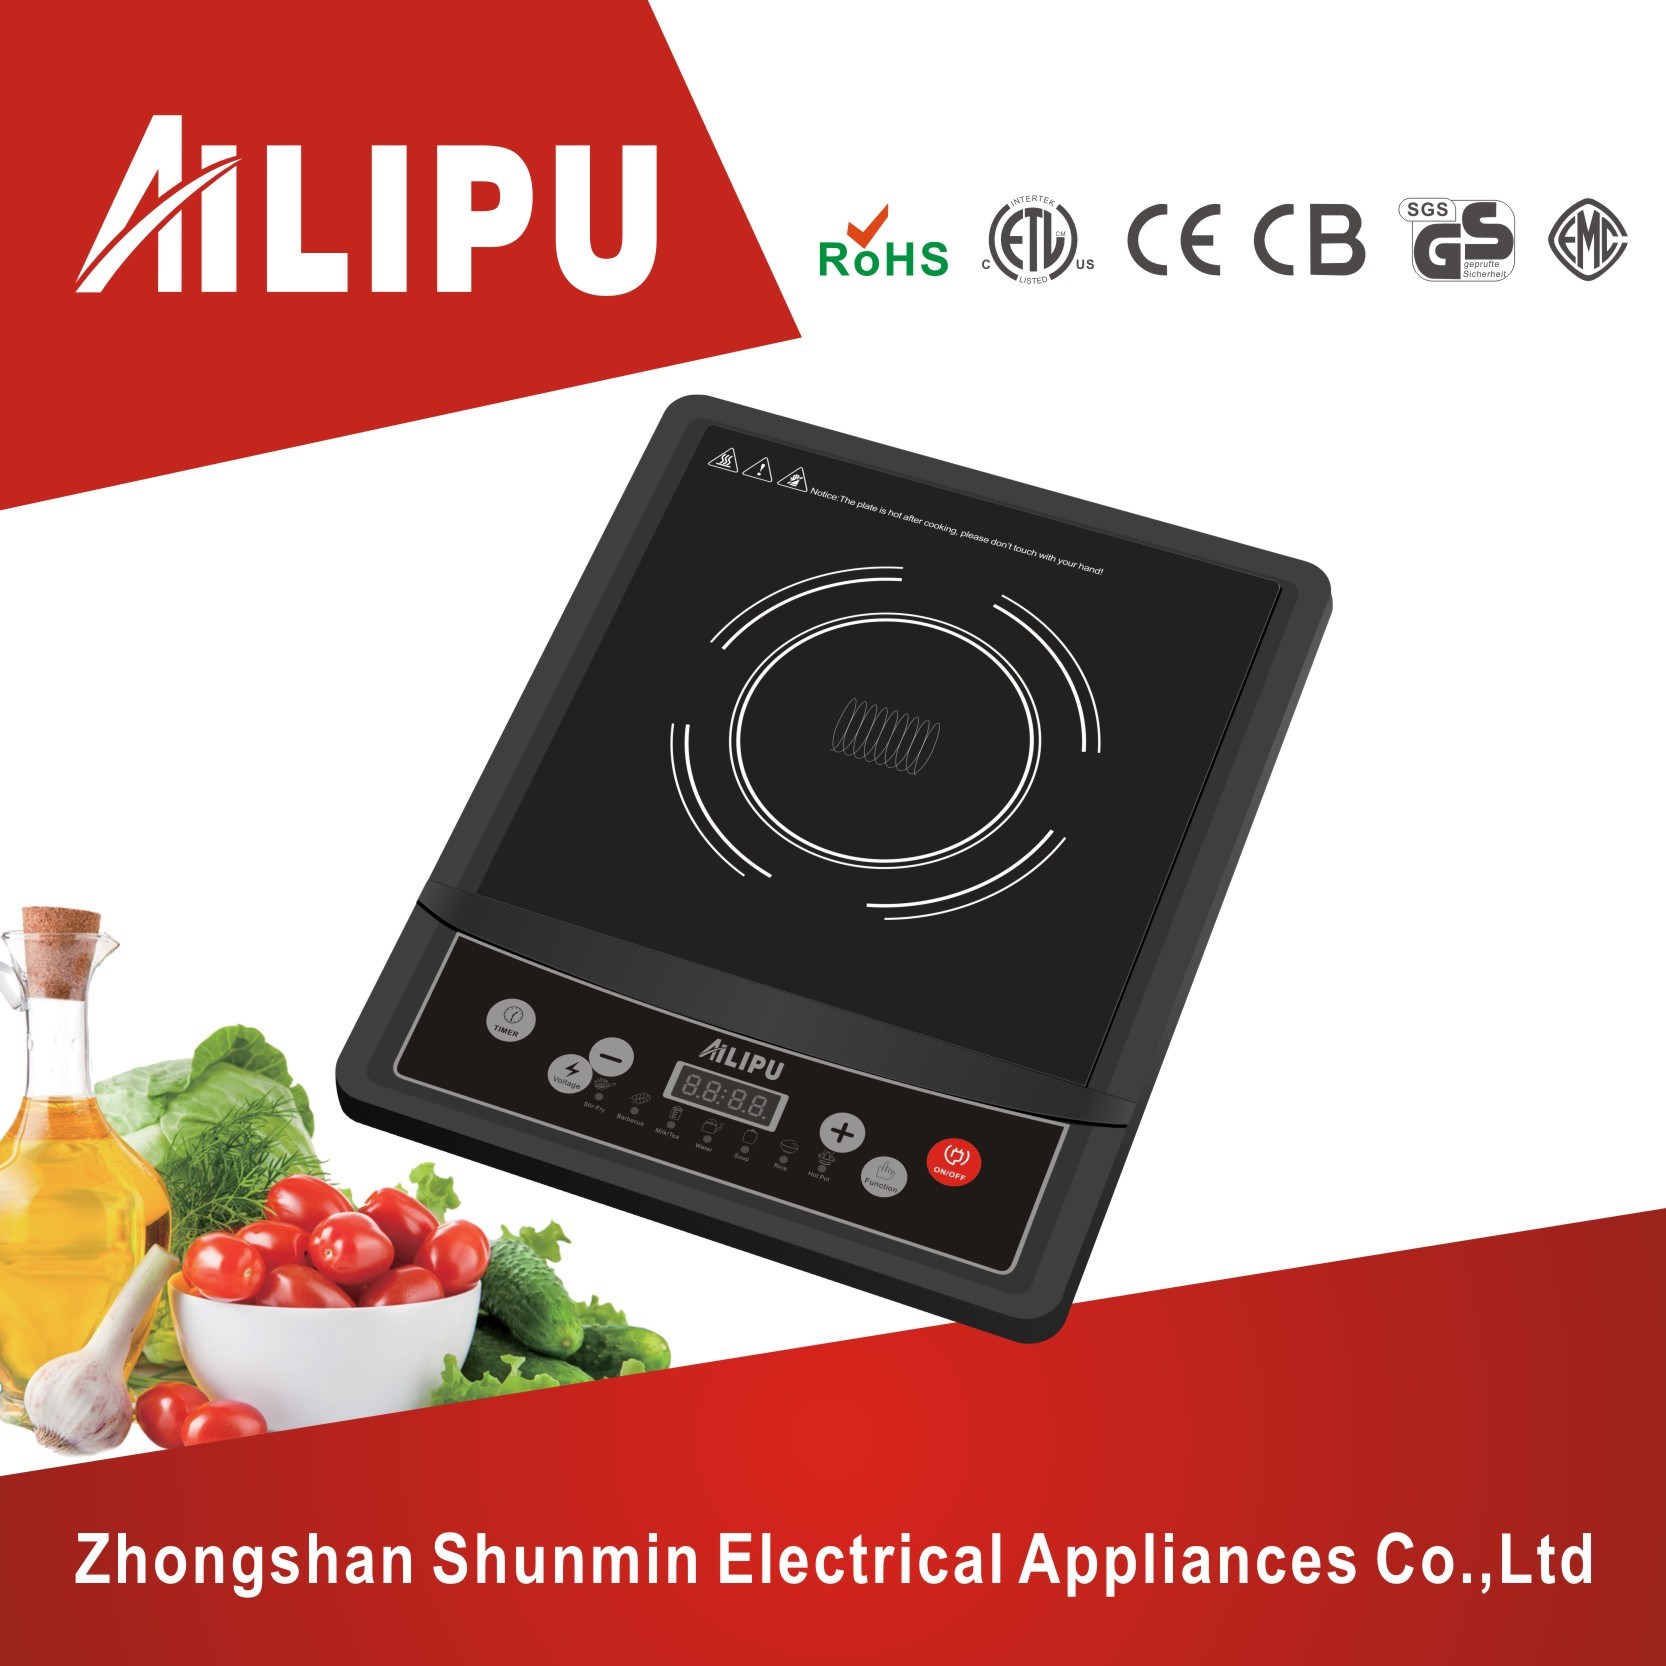 CE/CB Certificate Plastic Fram with Button Control Induction Cooktop 2kw